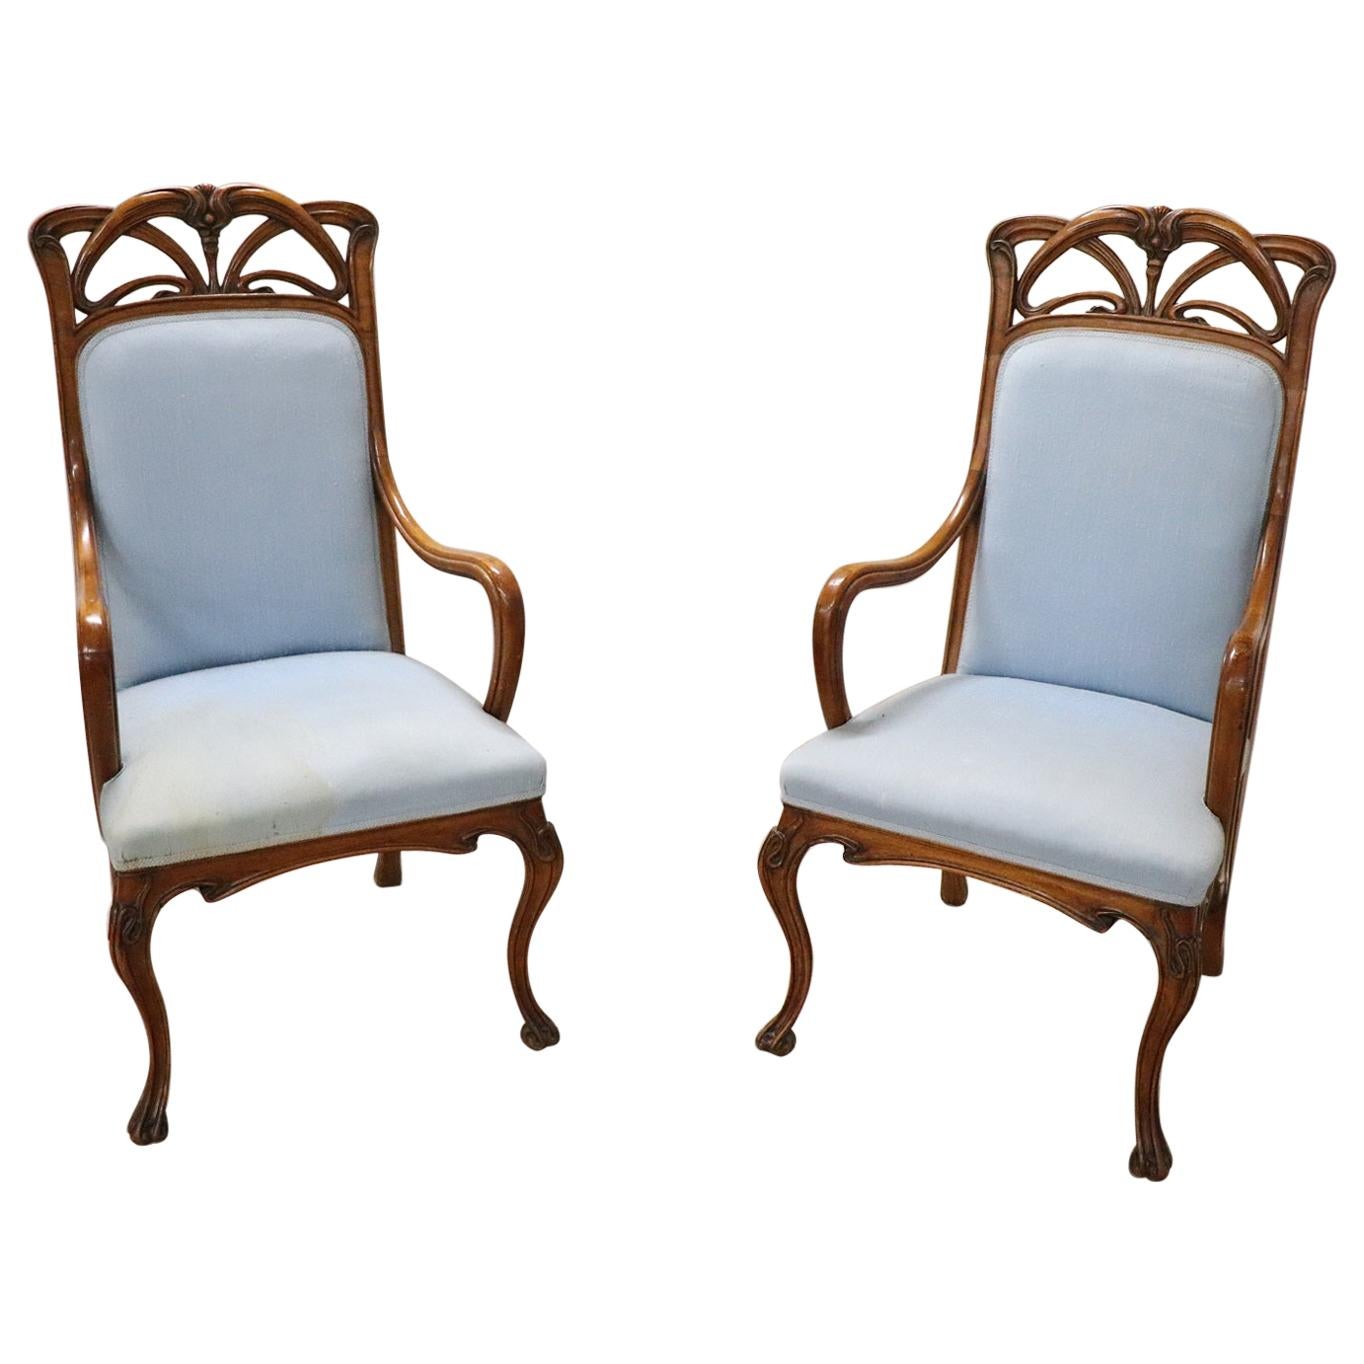 Early 20th Century Art Nouveau Carved Walnut Pair of Armchairs